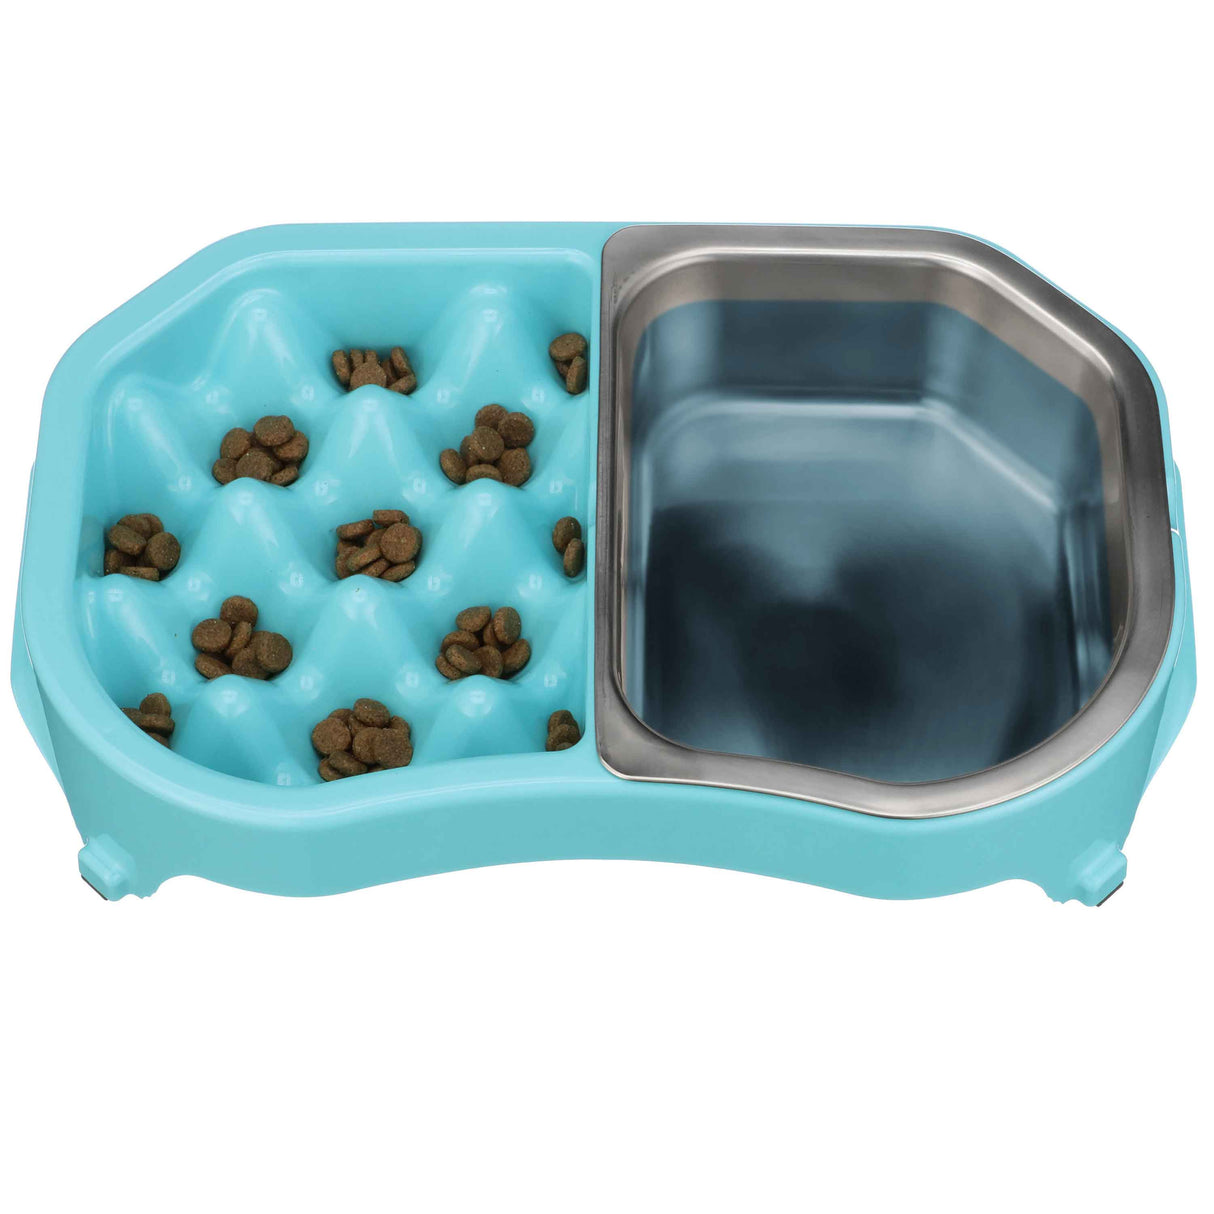 Aqua Double Diner with stainless steel insert with food and water